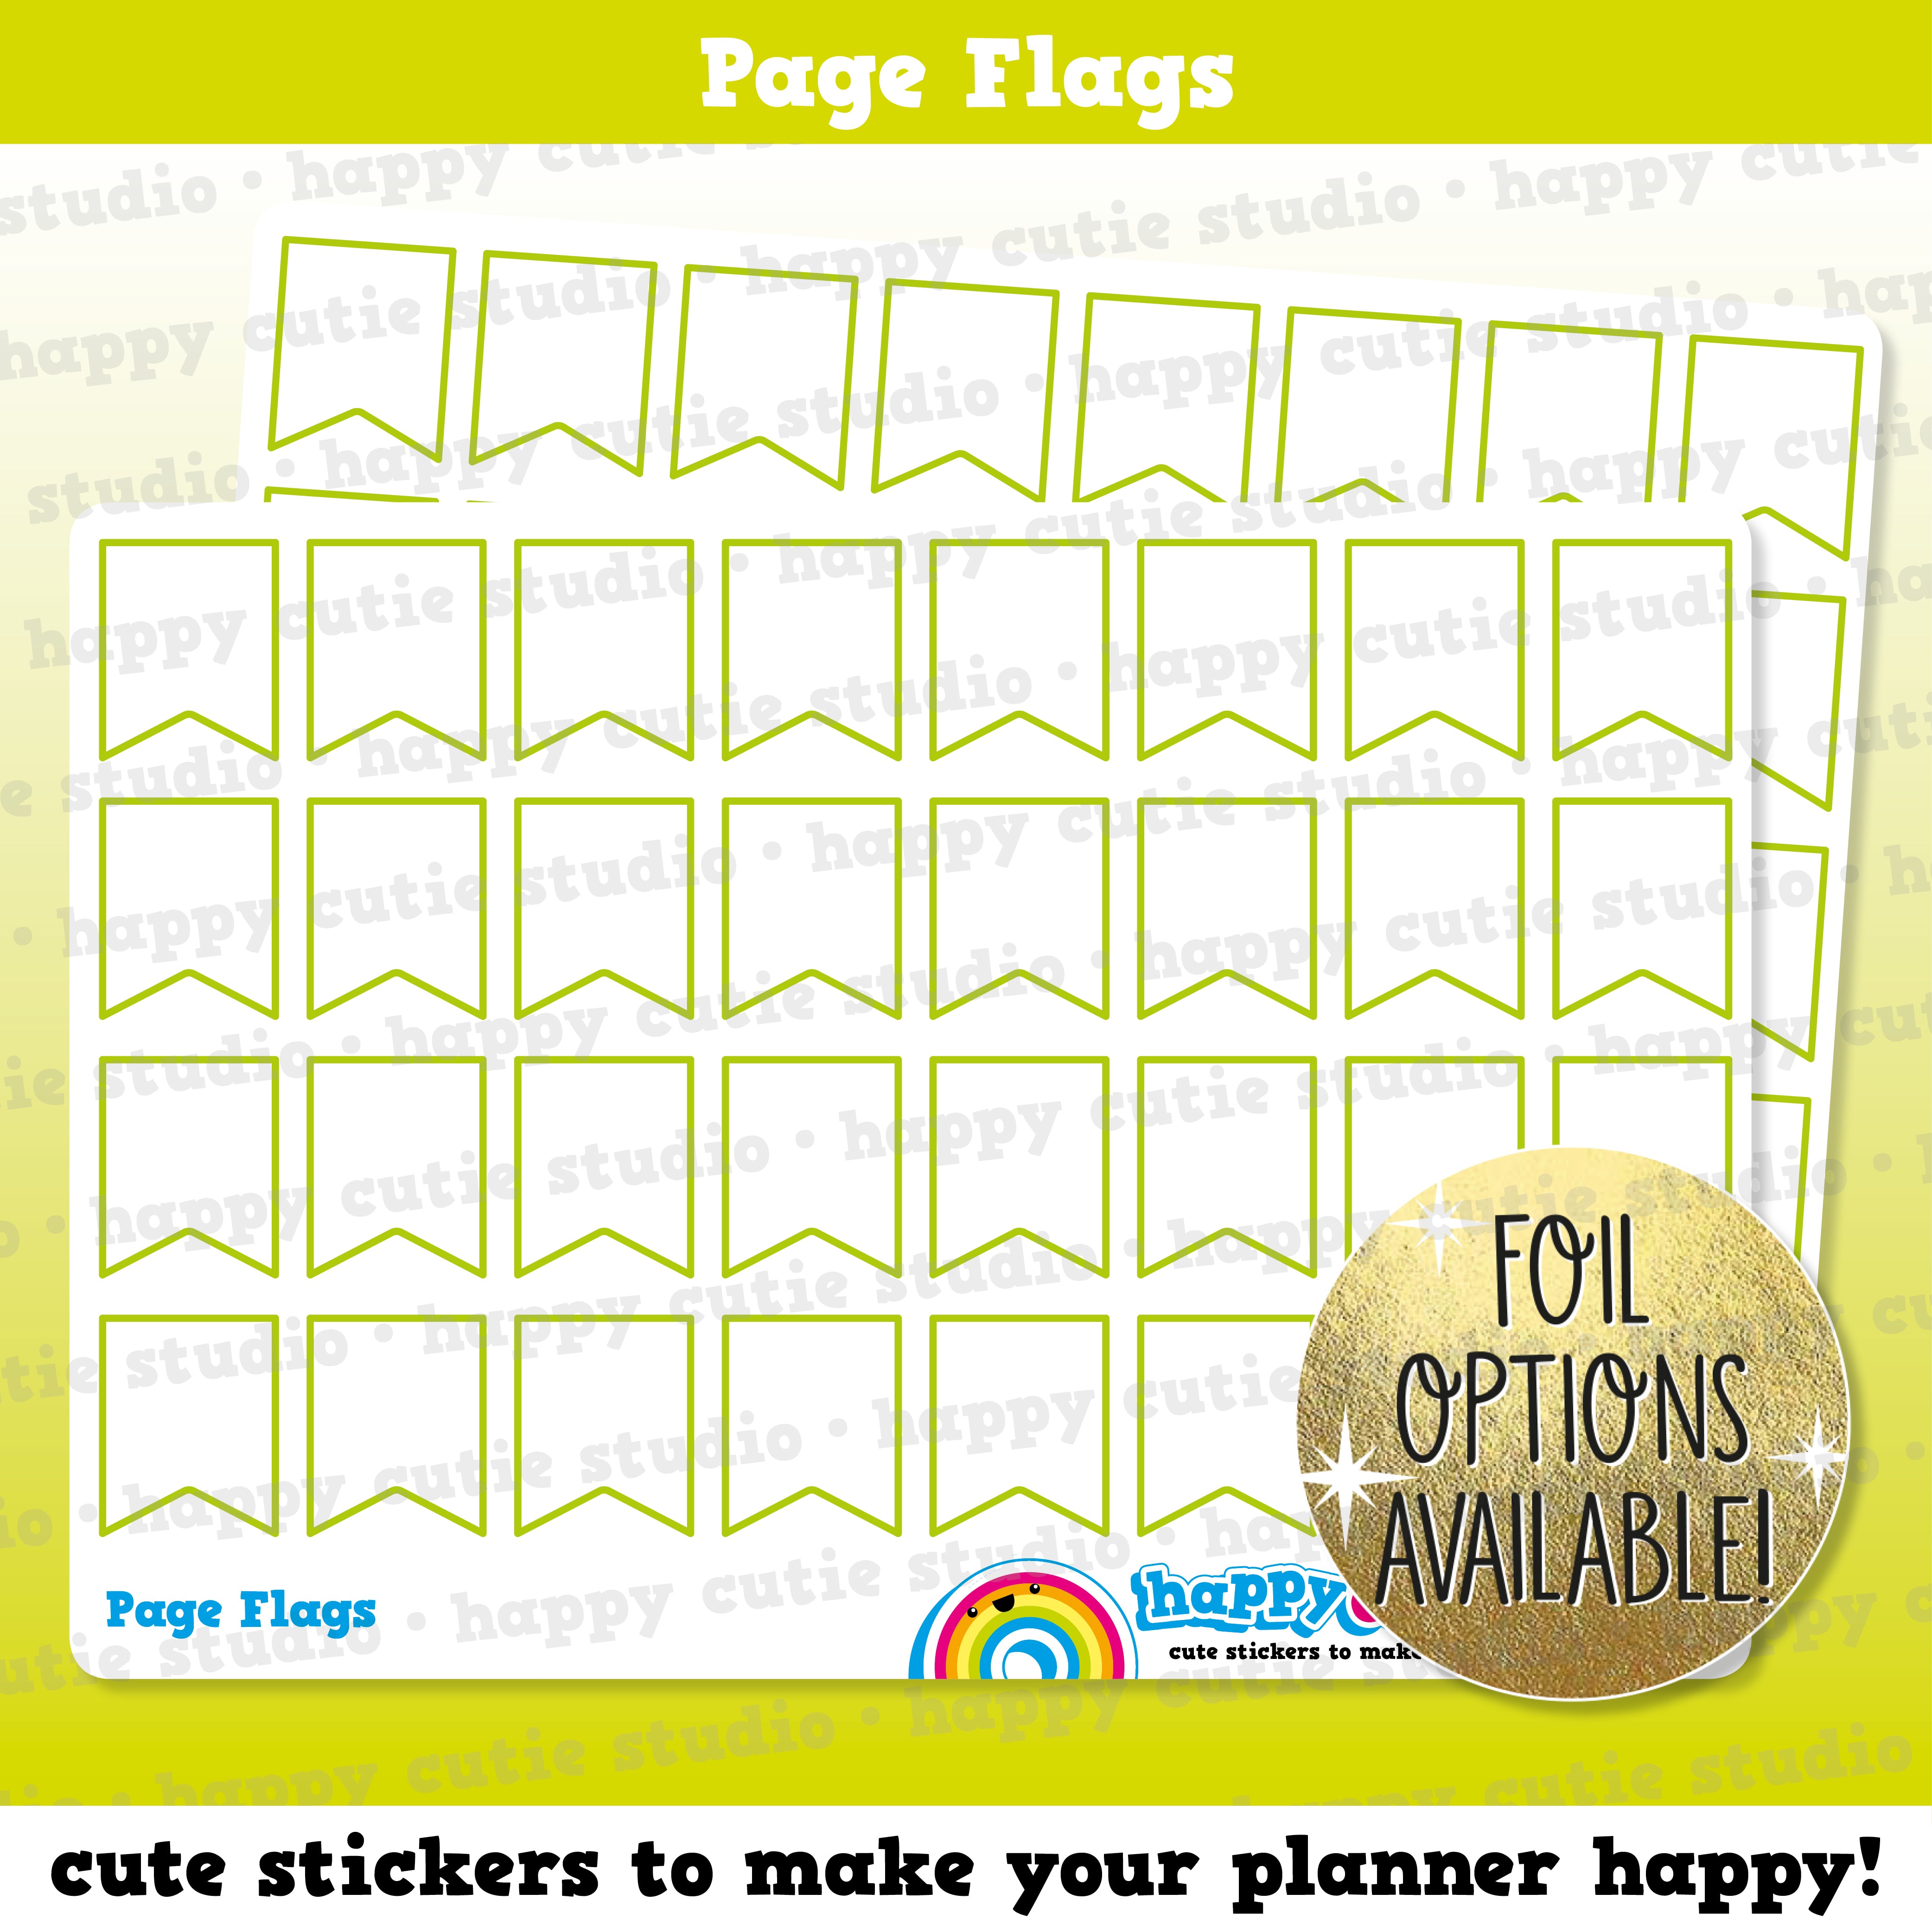 32 Cute Page Flags/Functional/Practical Planner Stickers